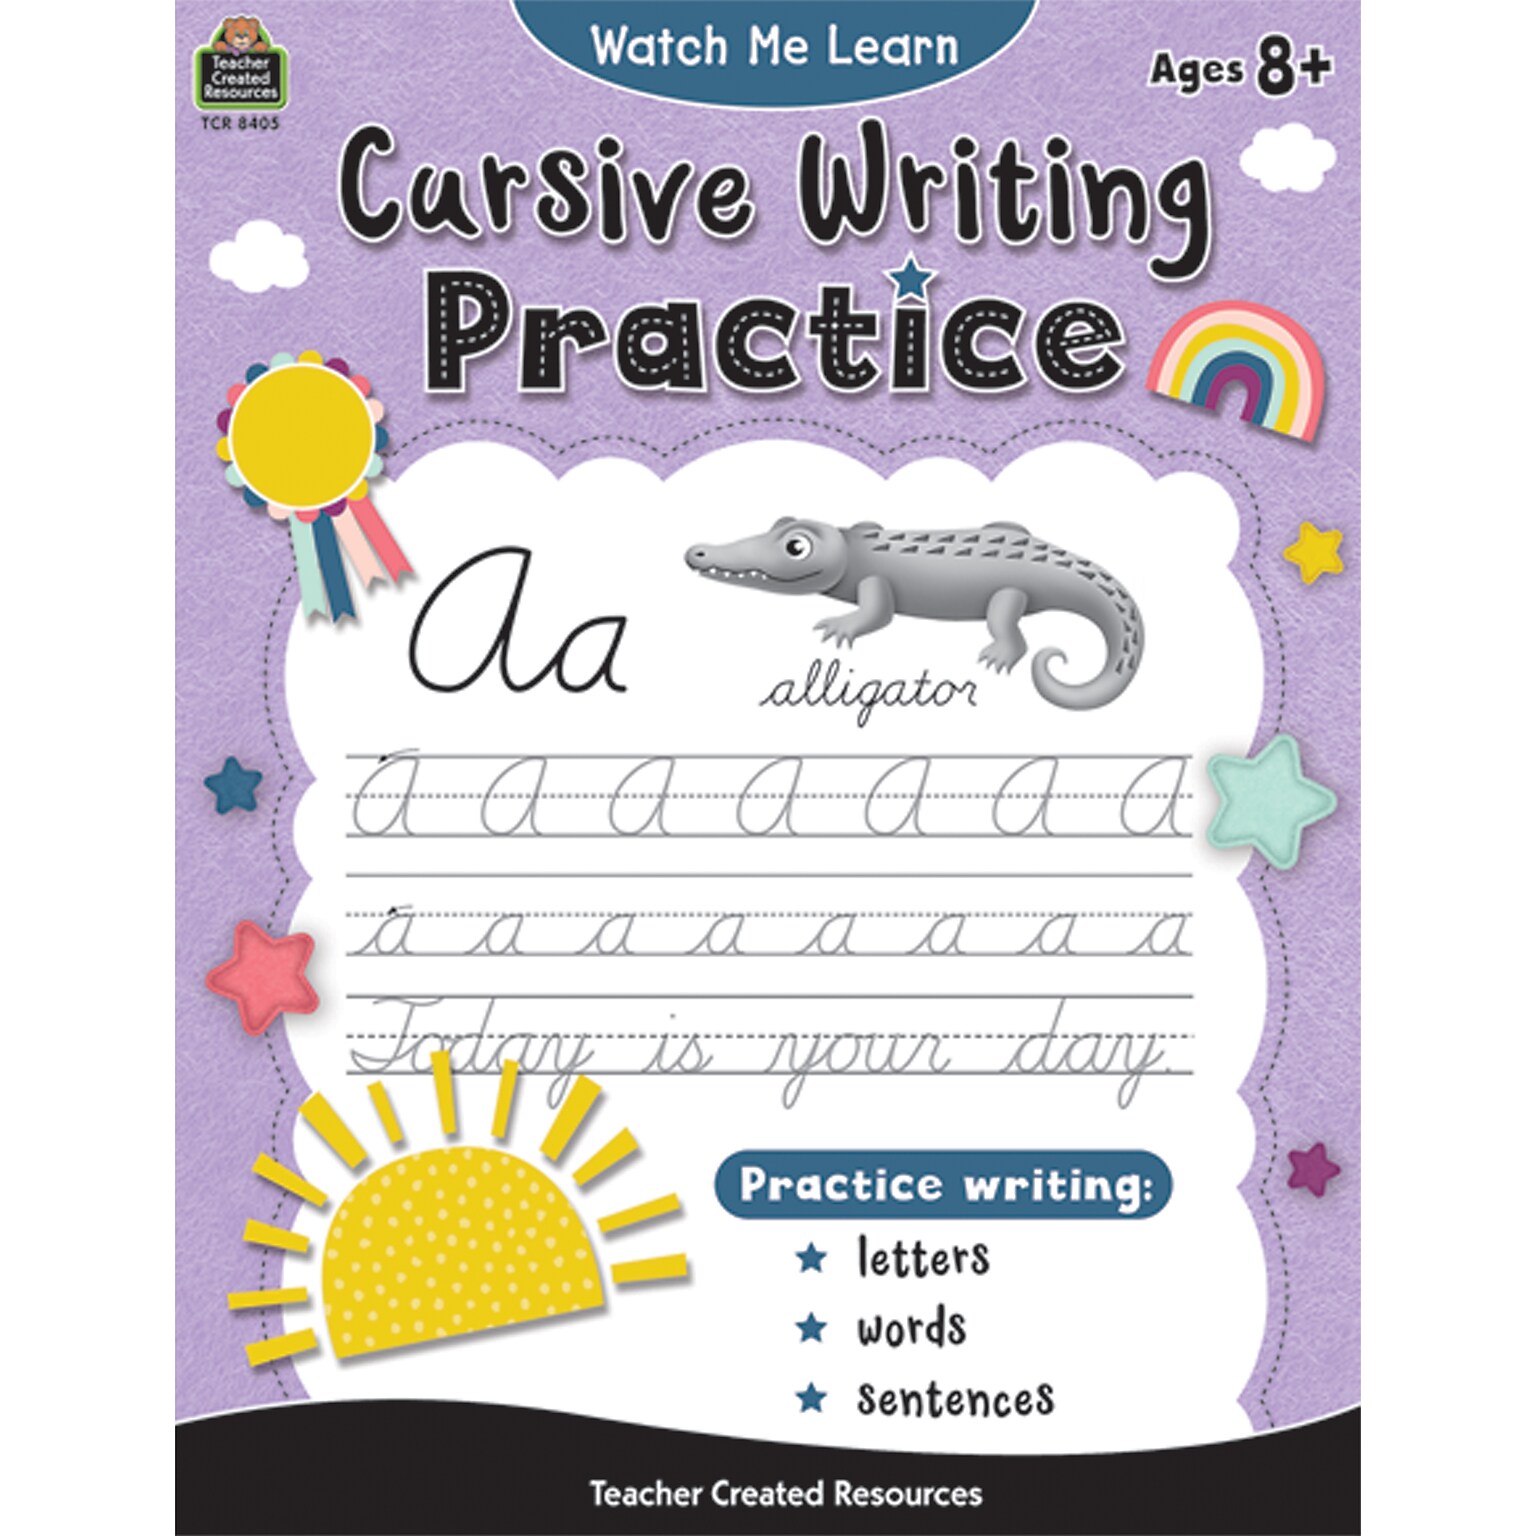 Teacher Created Resources Watch Me Learn: Cursive Writing Practice